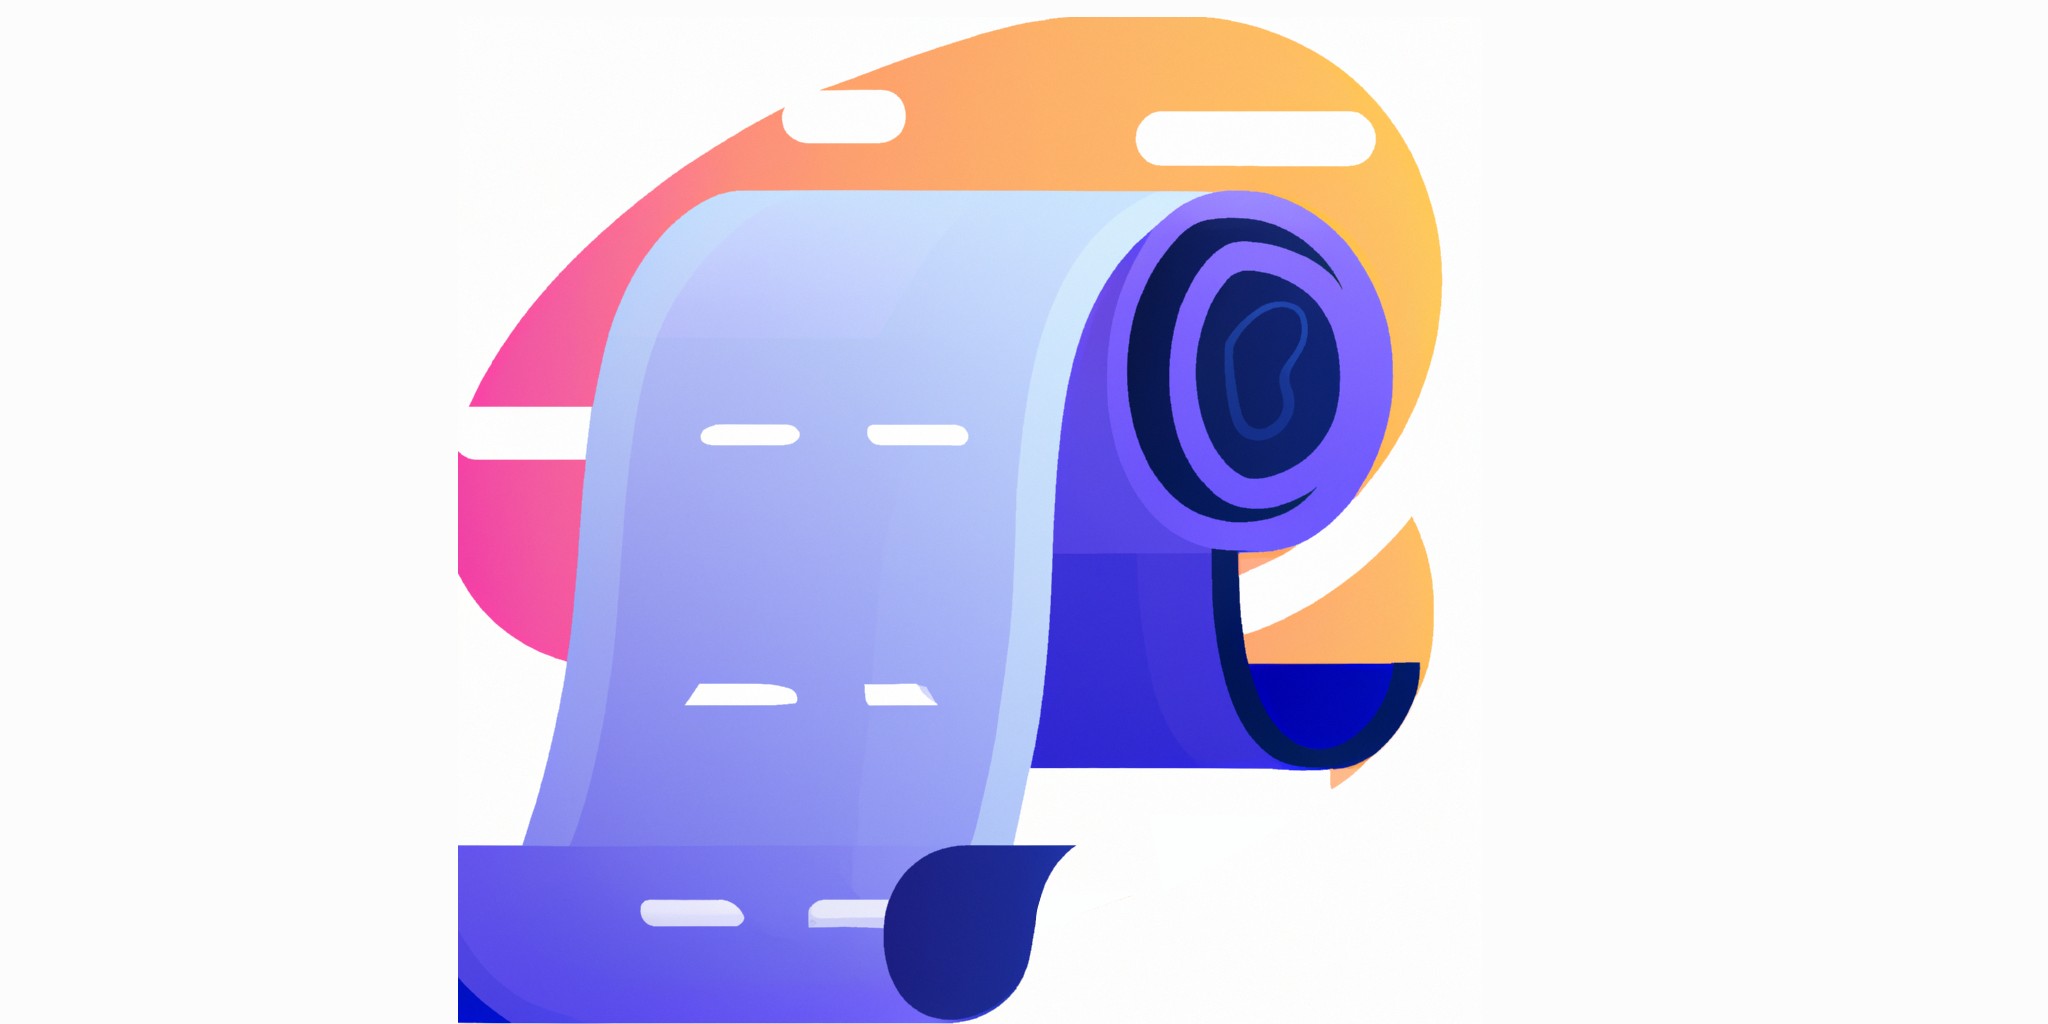 scroll in flat illustration style with gradients and white background